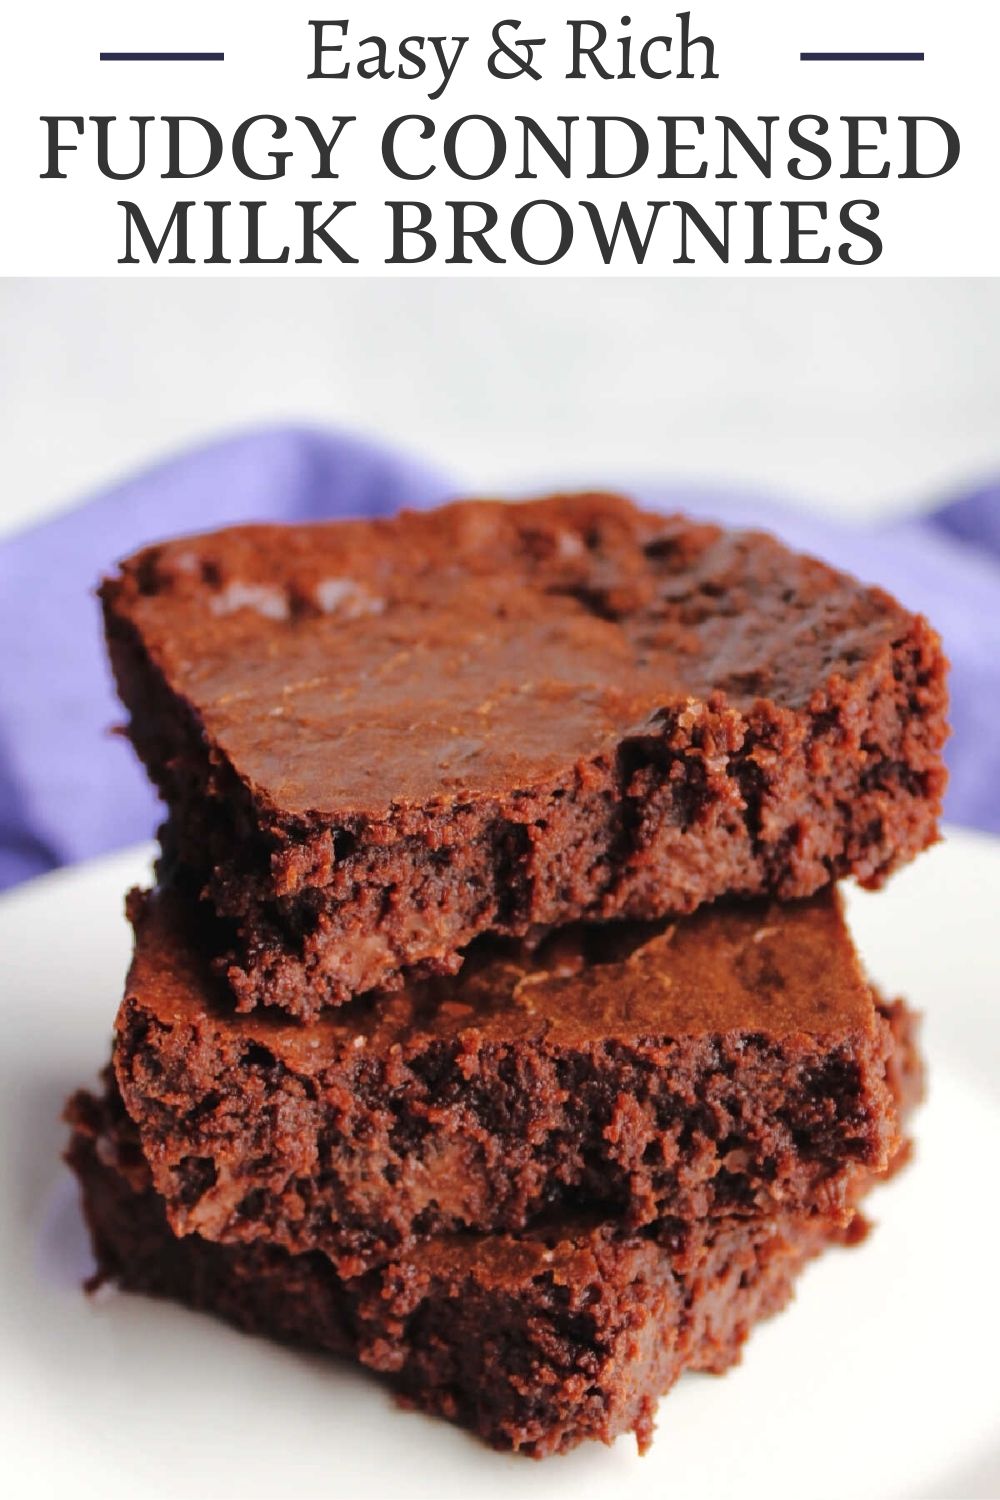 If you are wanting to bake up the richest fudgiest brownies of your life, you are in the right place. This recipe for condensed milk brownies is super simple and oh so good.